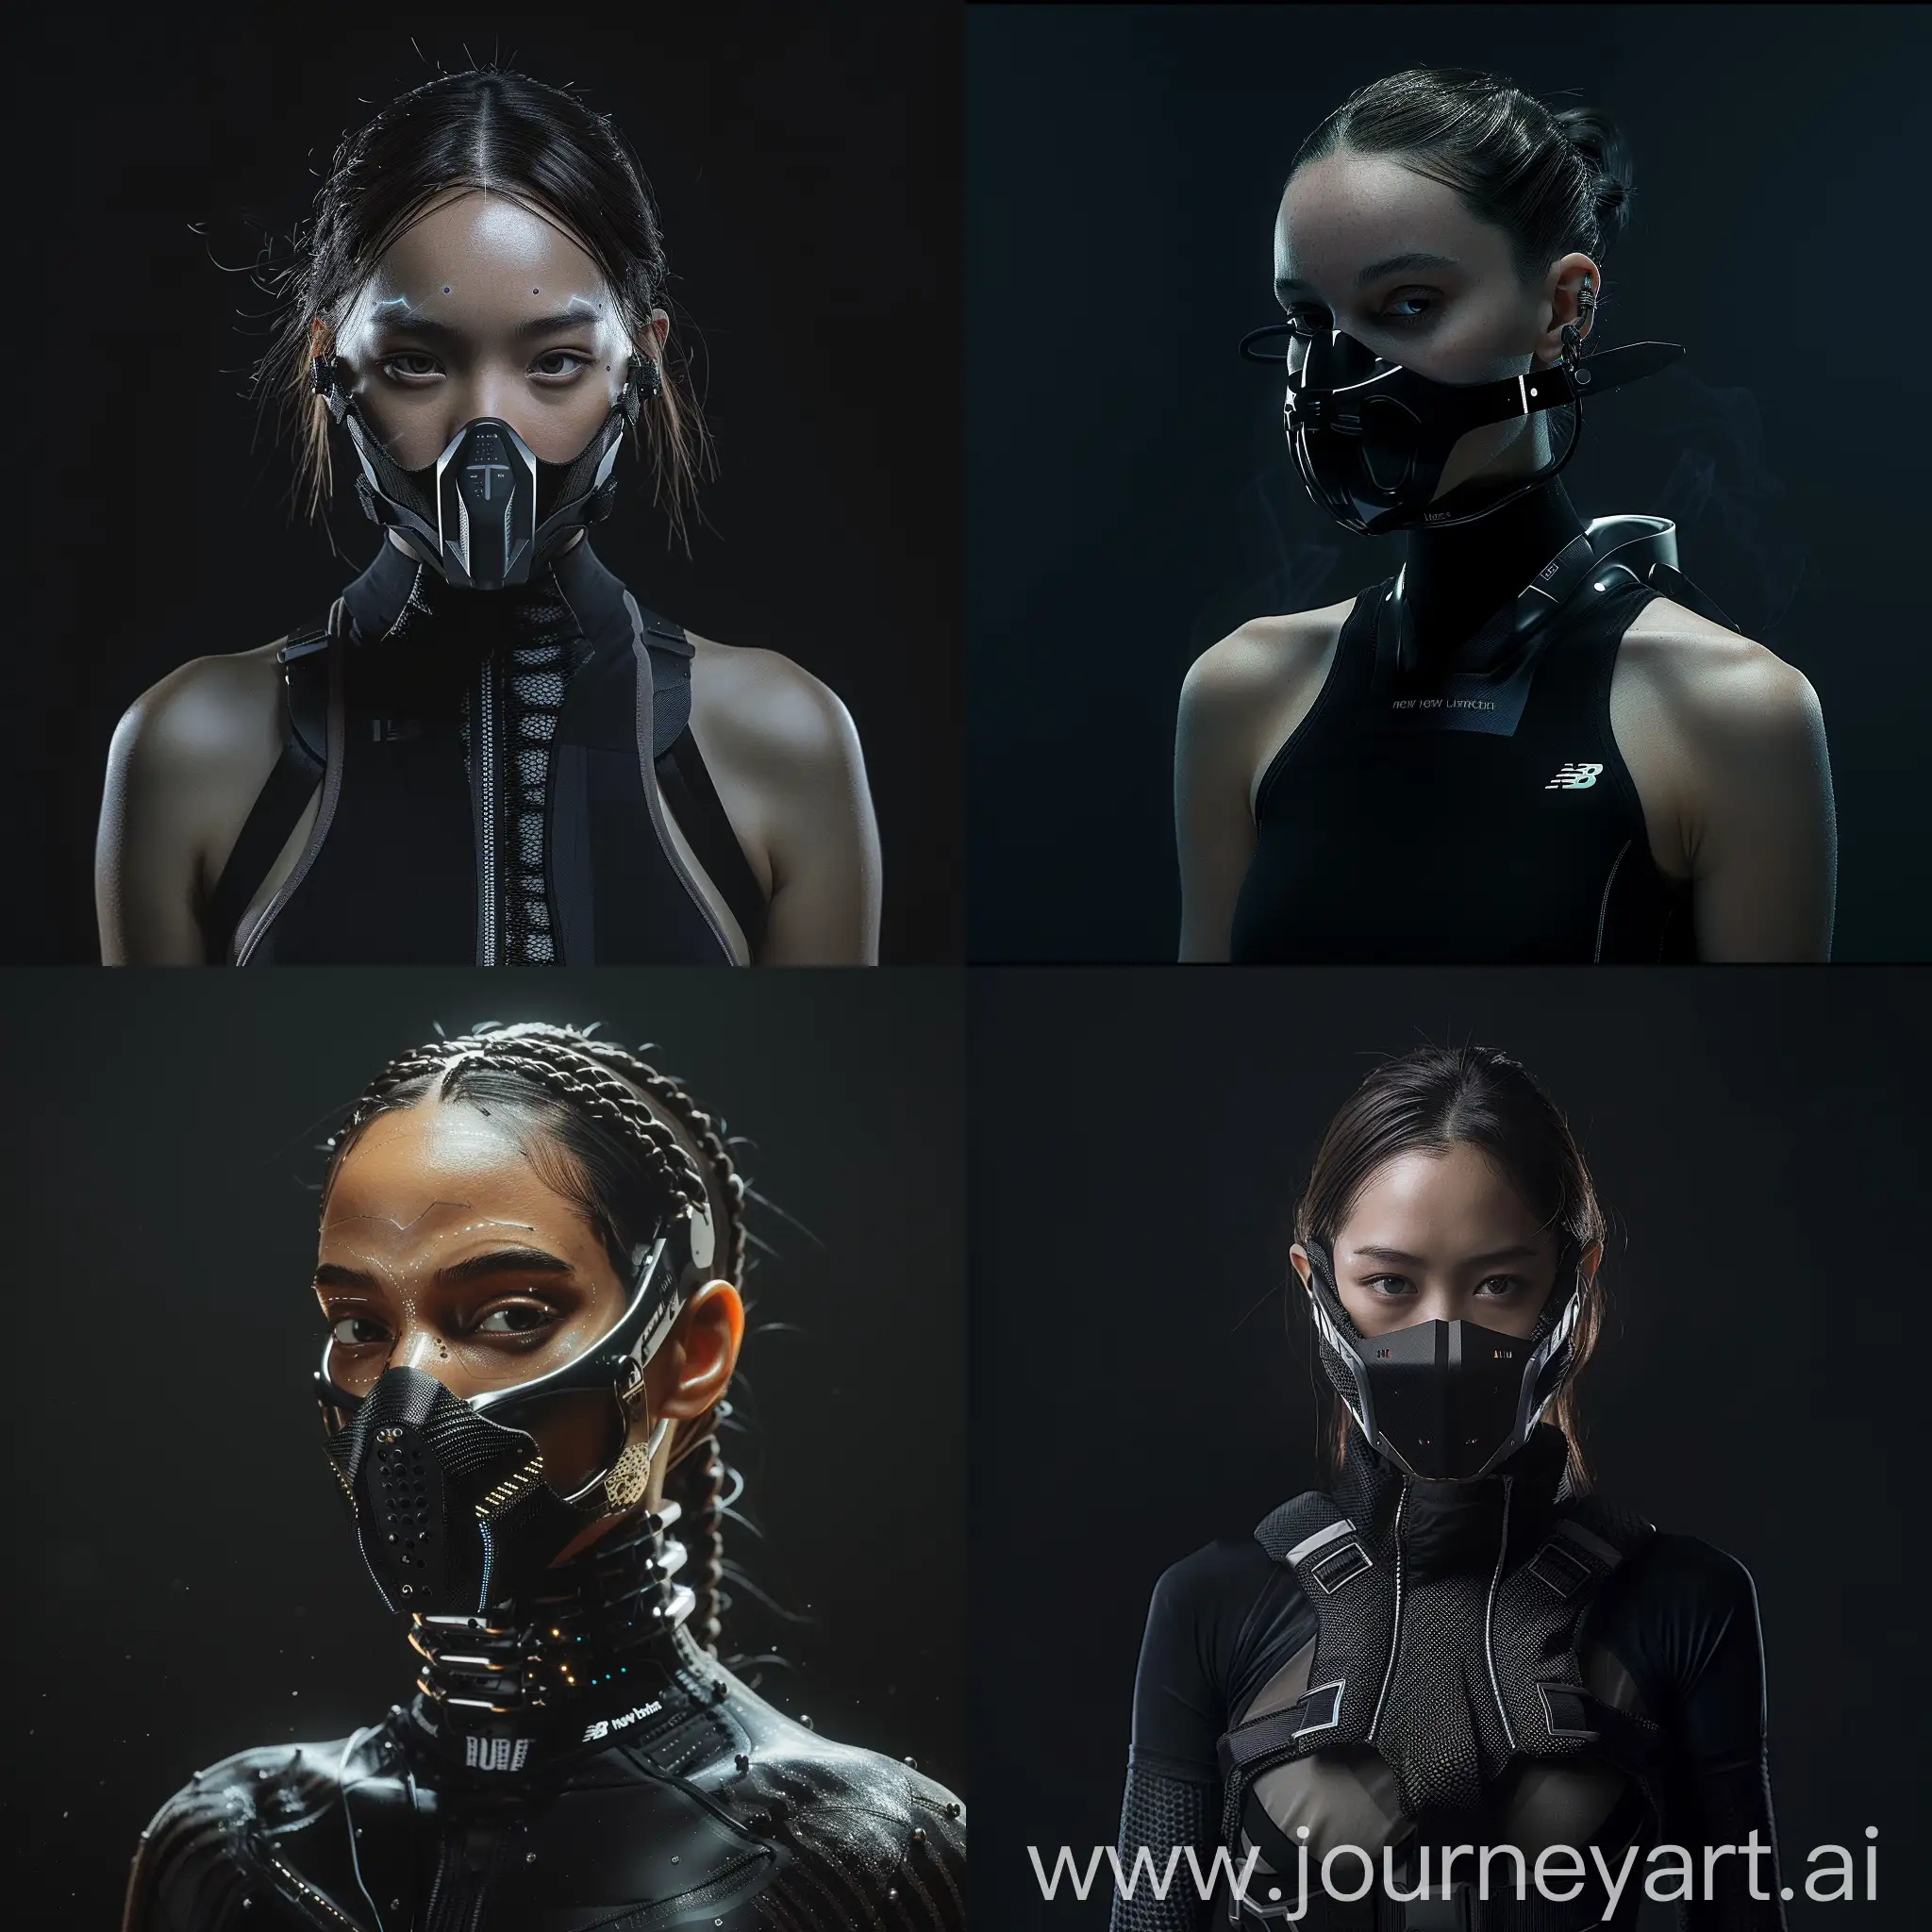 Against a sleek black backdrop, behold a captivating character adorned with a cybernetic mouth-covering mask. This fusion of man and machine seamlessly integrates cutting-edge technology with intricate details, boasting carbon fiber textures, sleek aluminum accents. Symbolizing the delicate equilibrium between humanity and technology, her appearance embodies the essence of a futuristic cyberpunk aesthetic, enriched with New Balance-inspired features. With dynamic movements reminiscent of action-packed film sequences, accompanied by cinematic haze and electric energy, she exudes an irresistible allure that harmoniously balances the beauty of the human form with the power of cybernetic enhancement.